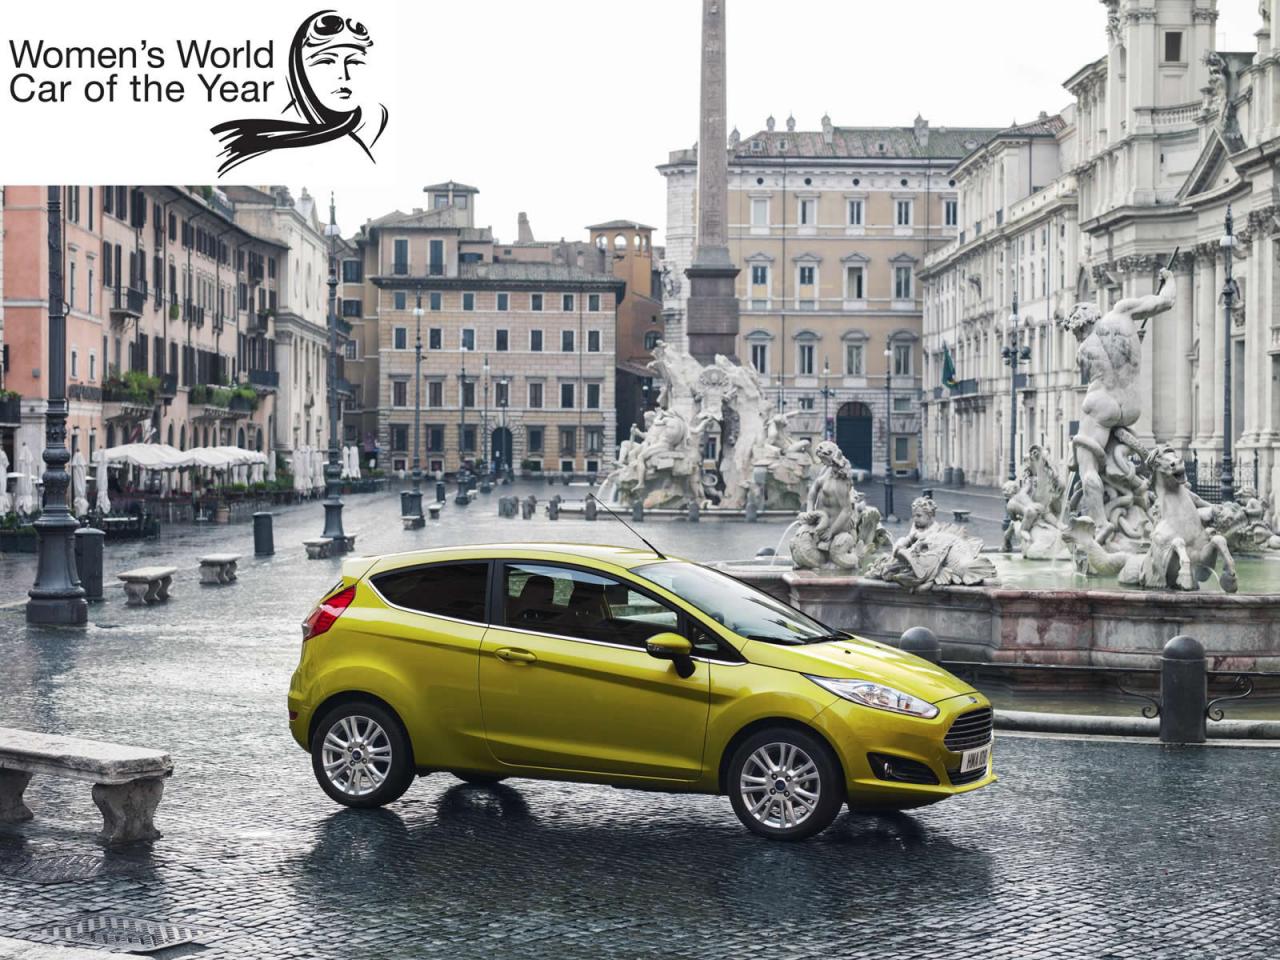 Ford Fiesta 1.0-liter EcoBoost is Women's World Car of the Year